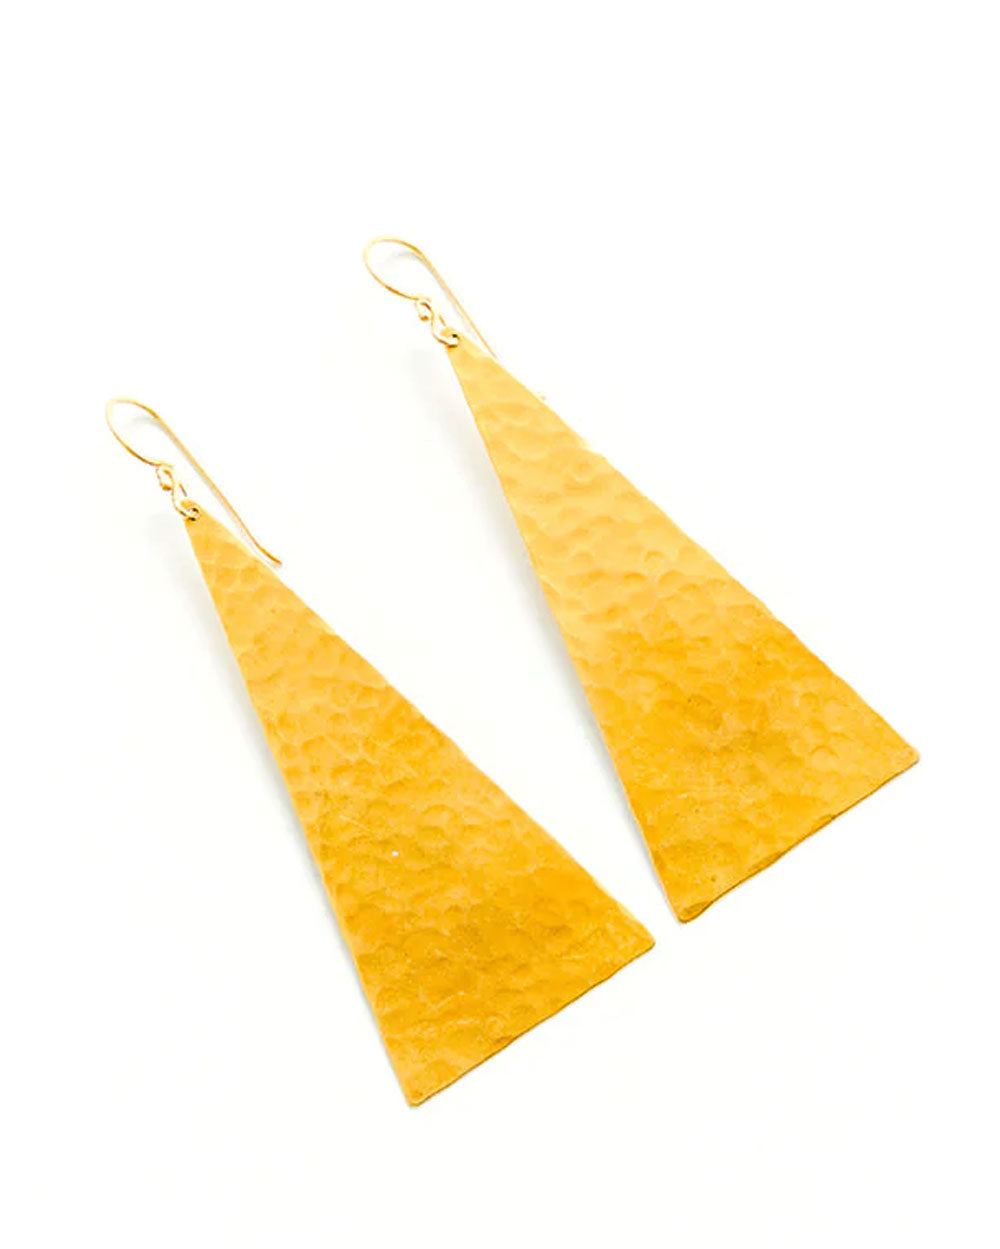 Giant Gold Triangle Earrings